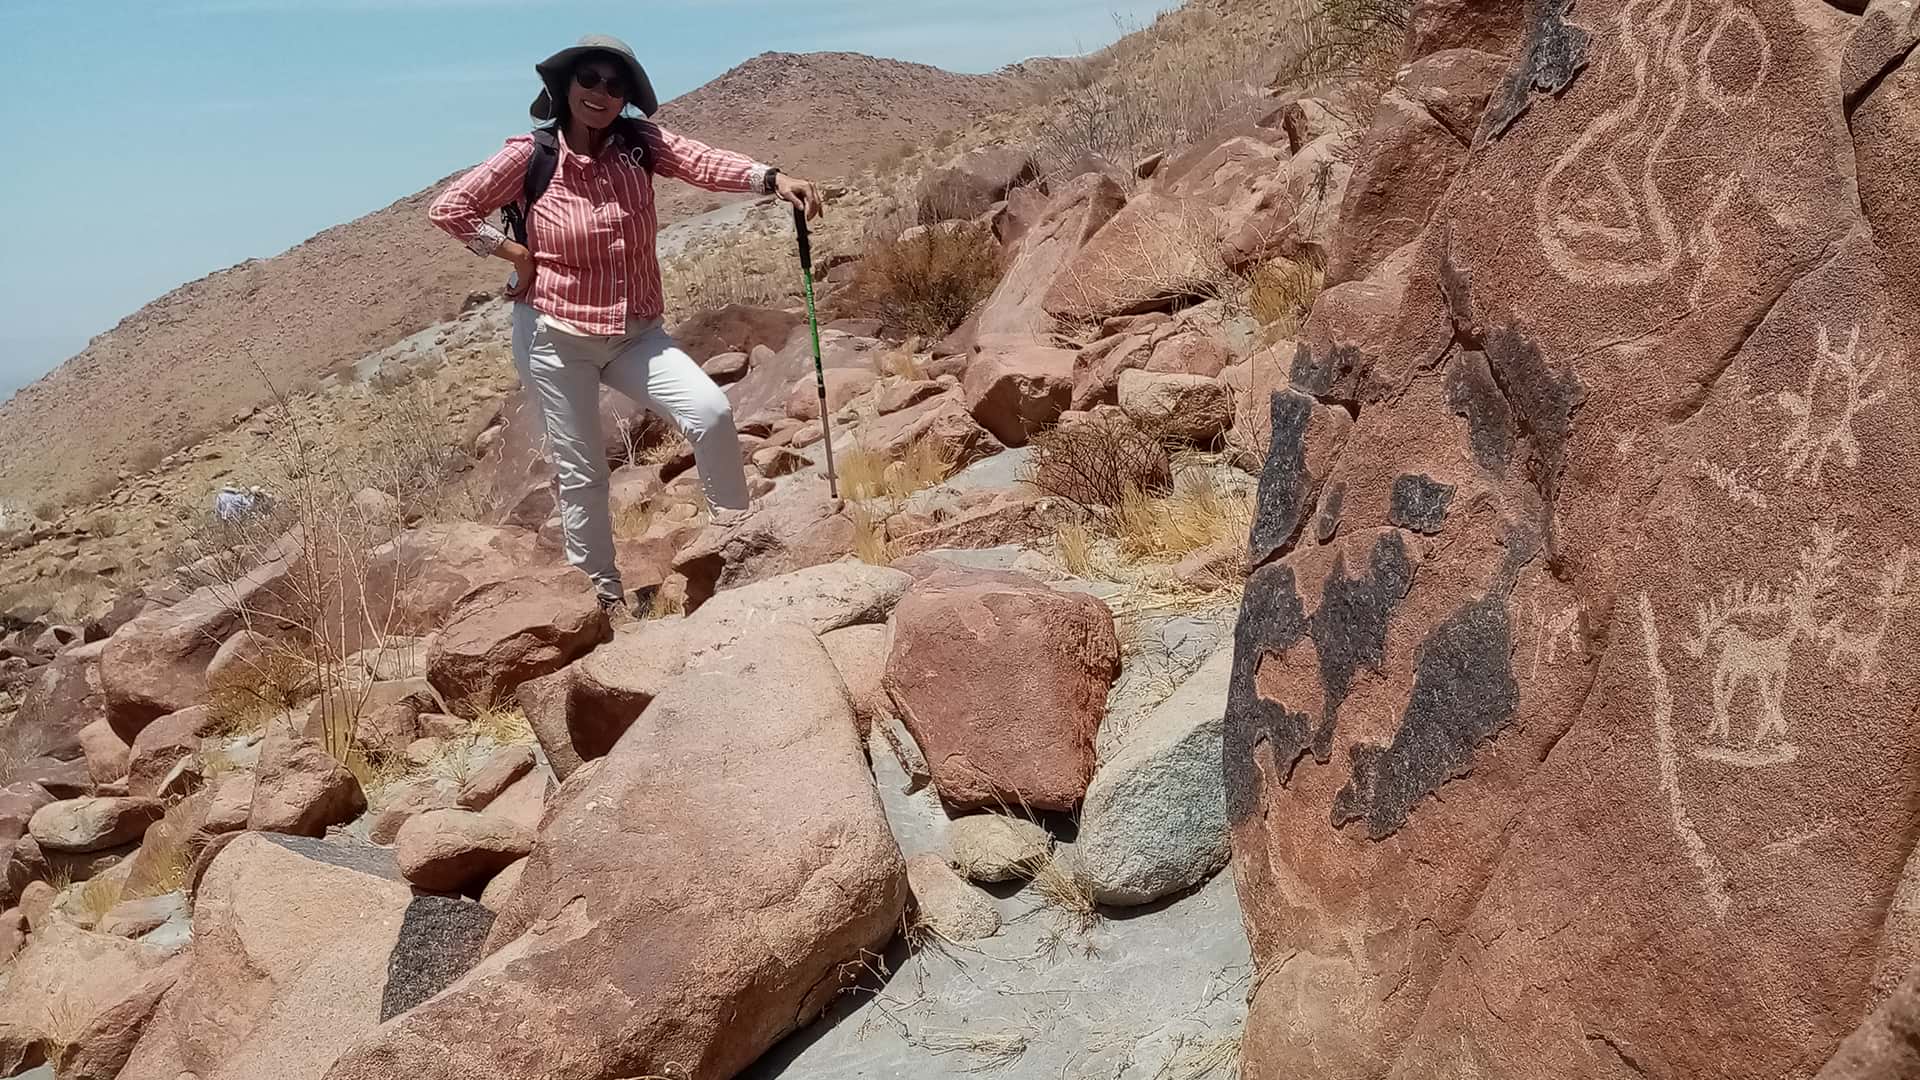 11A woman leans on her walking pole on a hillside in desert terrain. There are petroglyphs on the rock beside her. Seen during a tour with Responsible Travel Peru from Arequipa